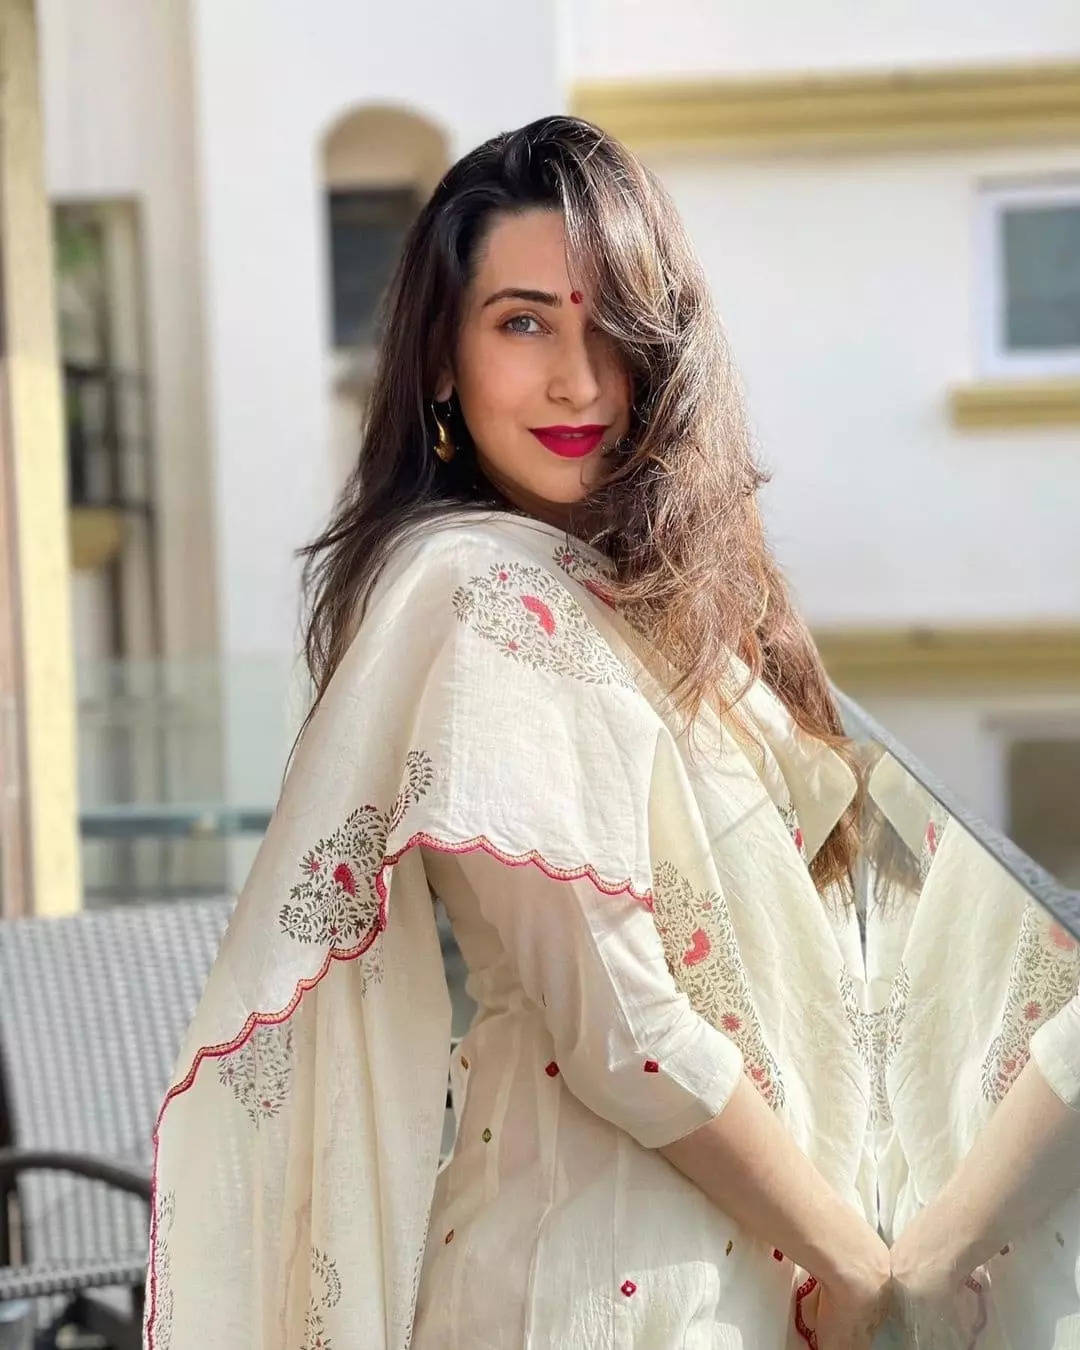 35 Times Karisma Kapoor Made Style Statements To Inspire New-Age Brides